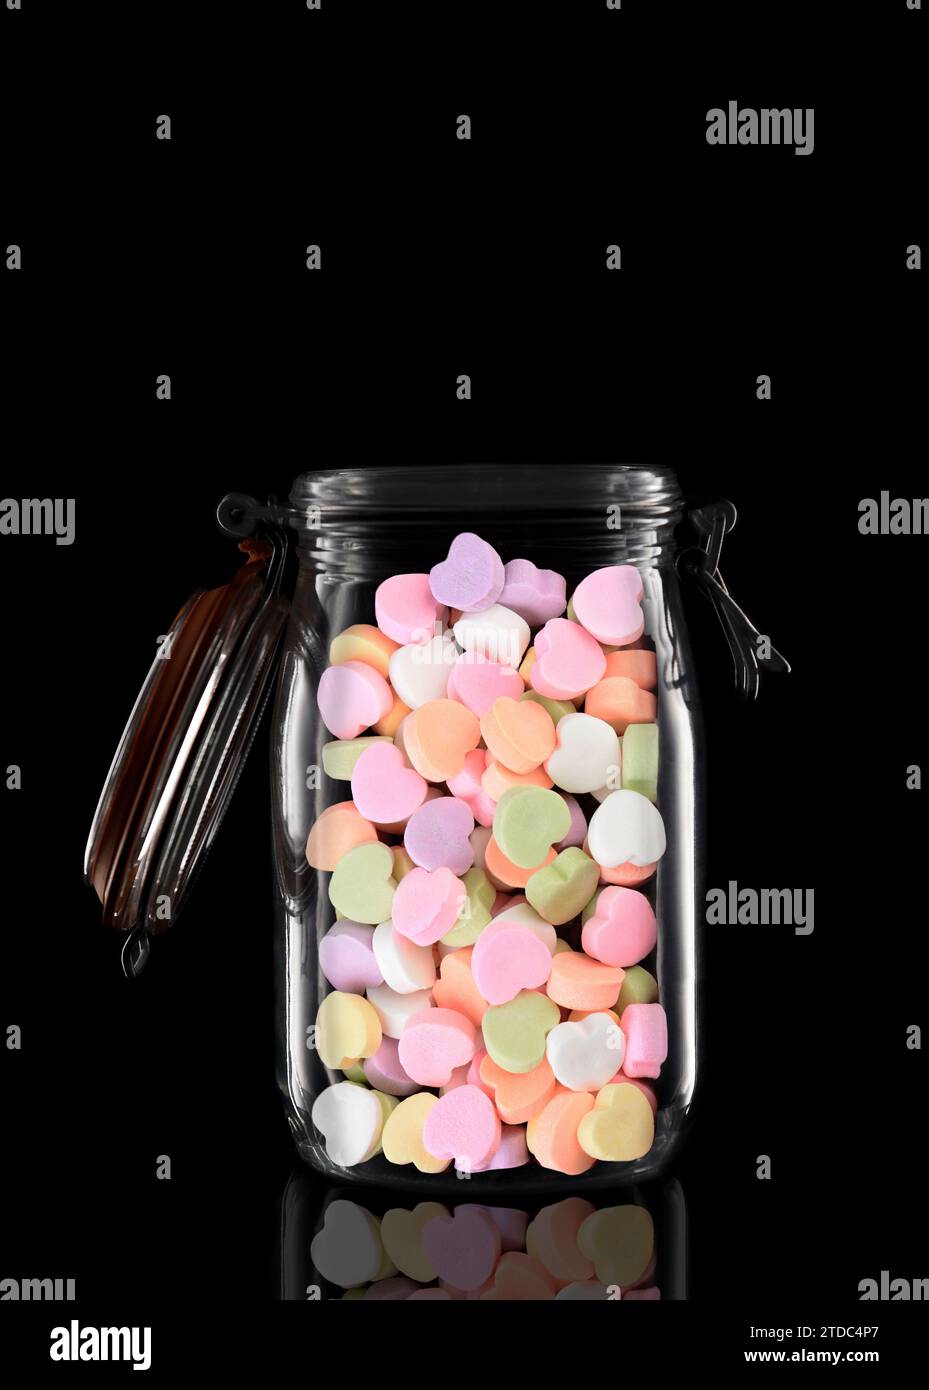 A glass storage or canning jar filled with Valentines Candy Hearts isolated on black with reflection, with lid open. Stock Photo